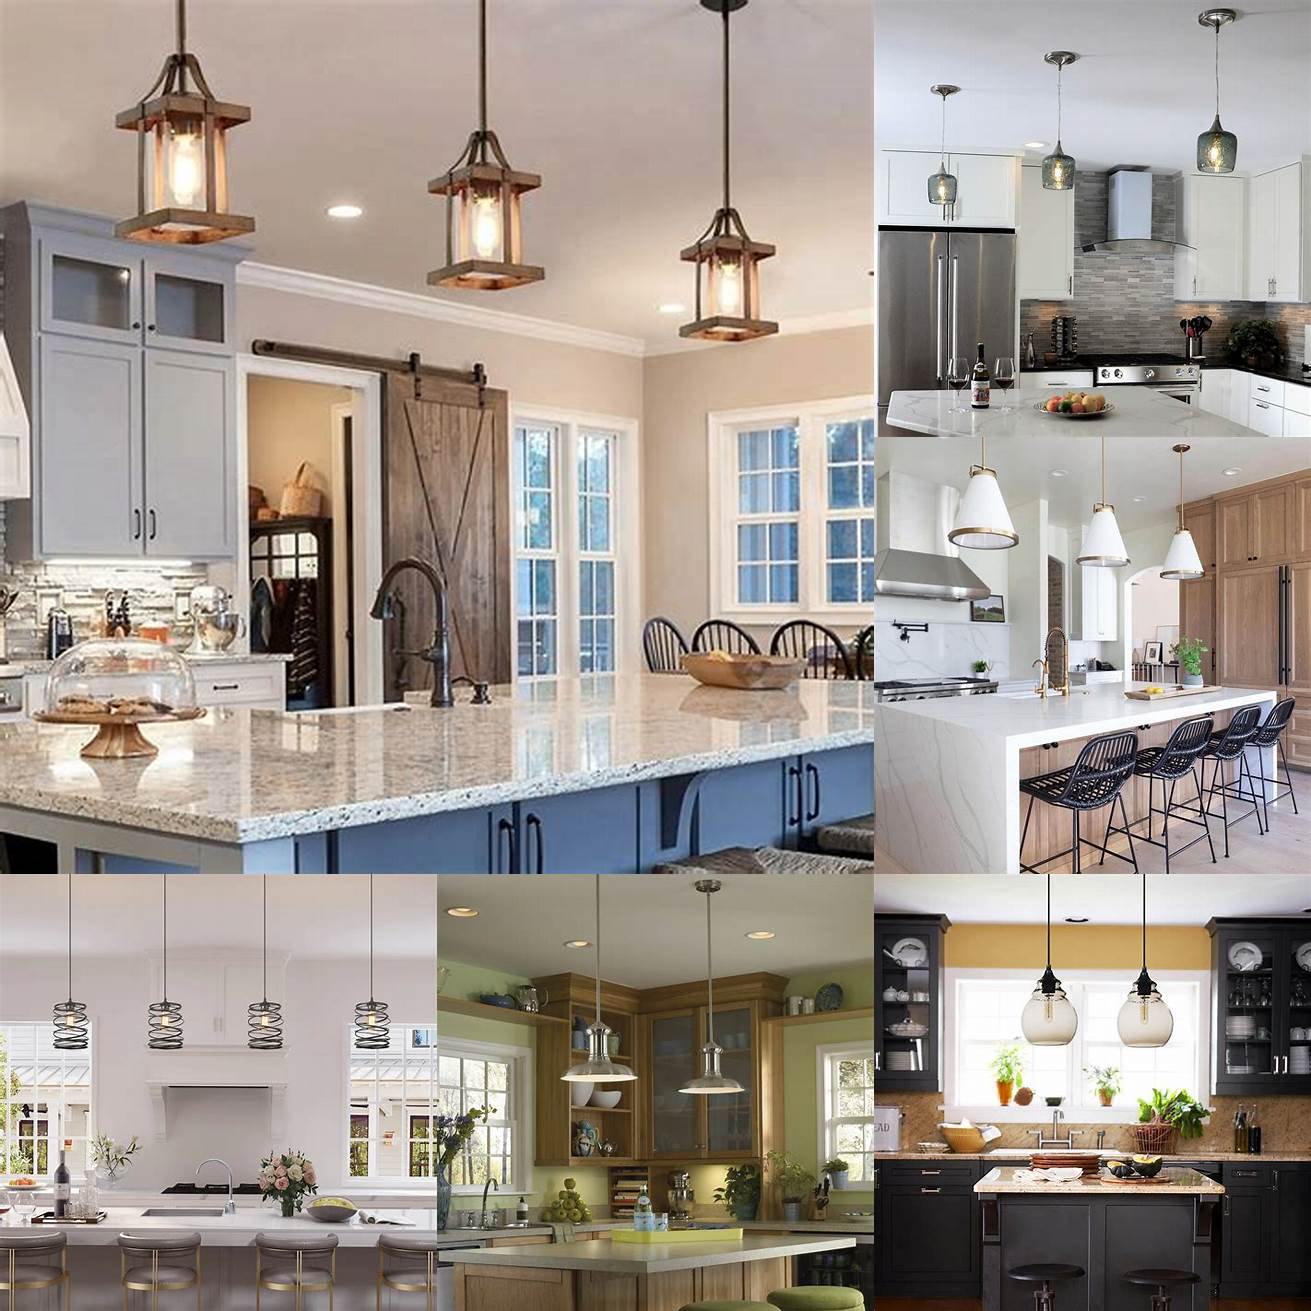 Pendant lights are a popular choice for kitchen islands and over sink areas